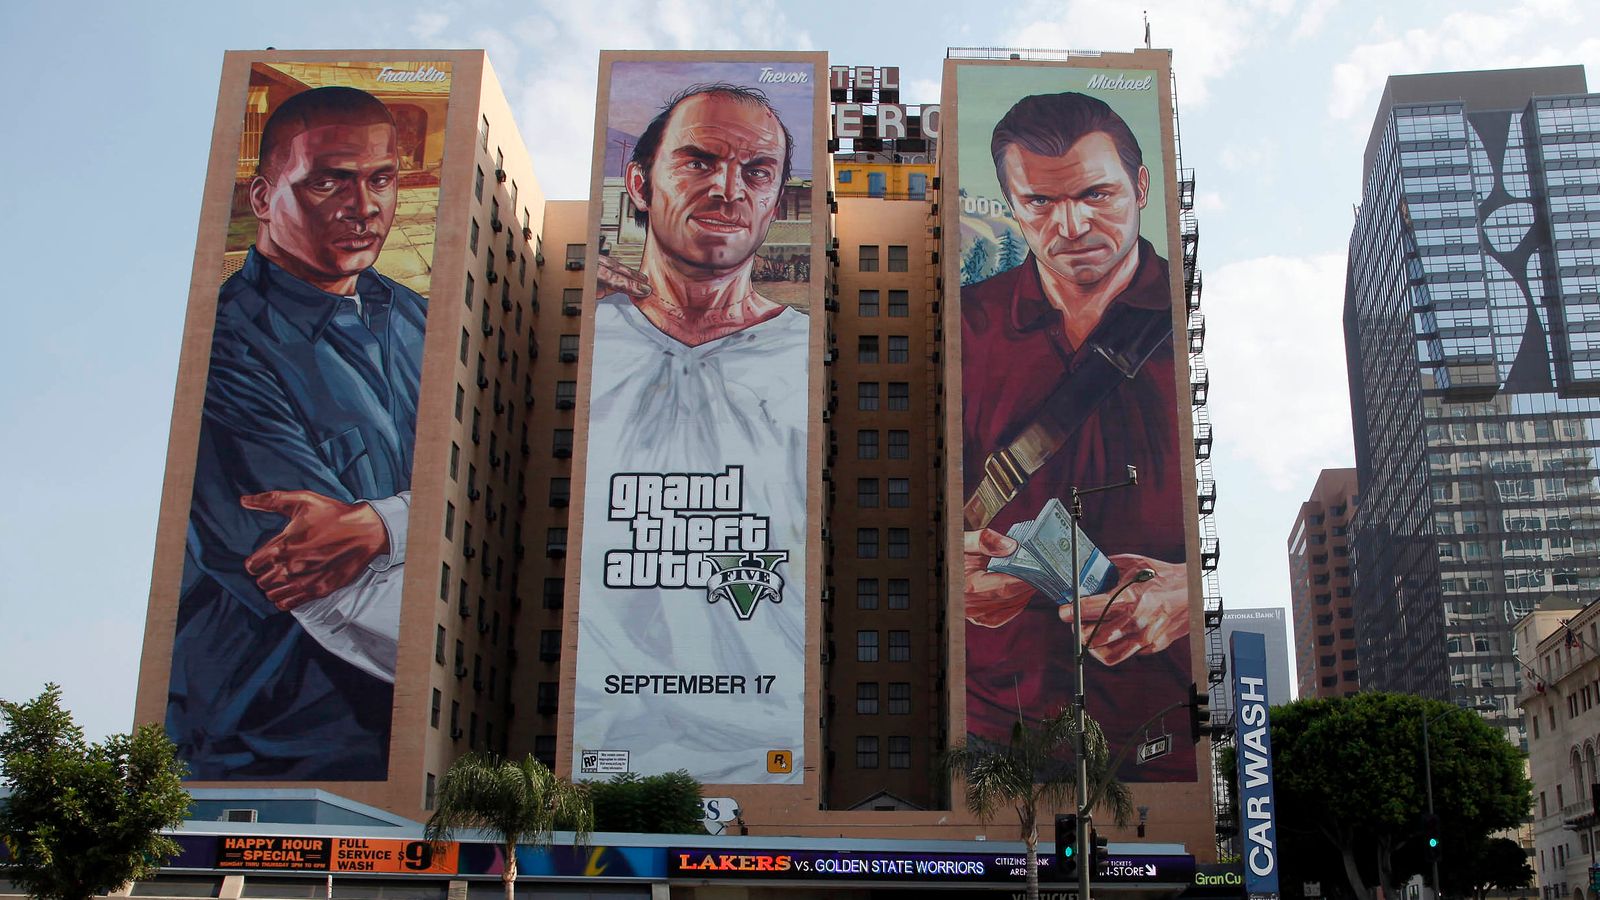 Grand Theft Auto V and Grand Theft Auto Online - Announcement Trailer